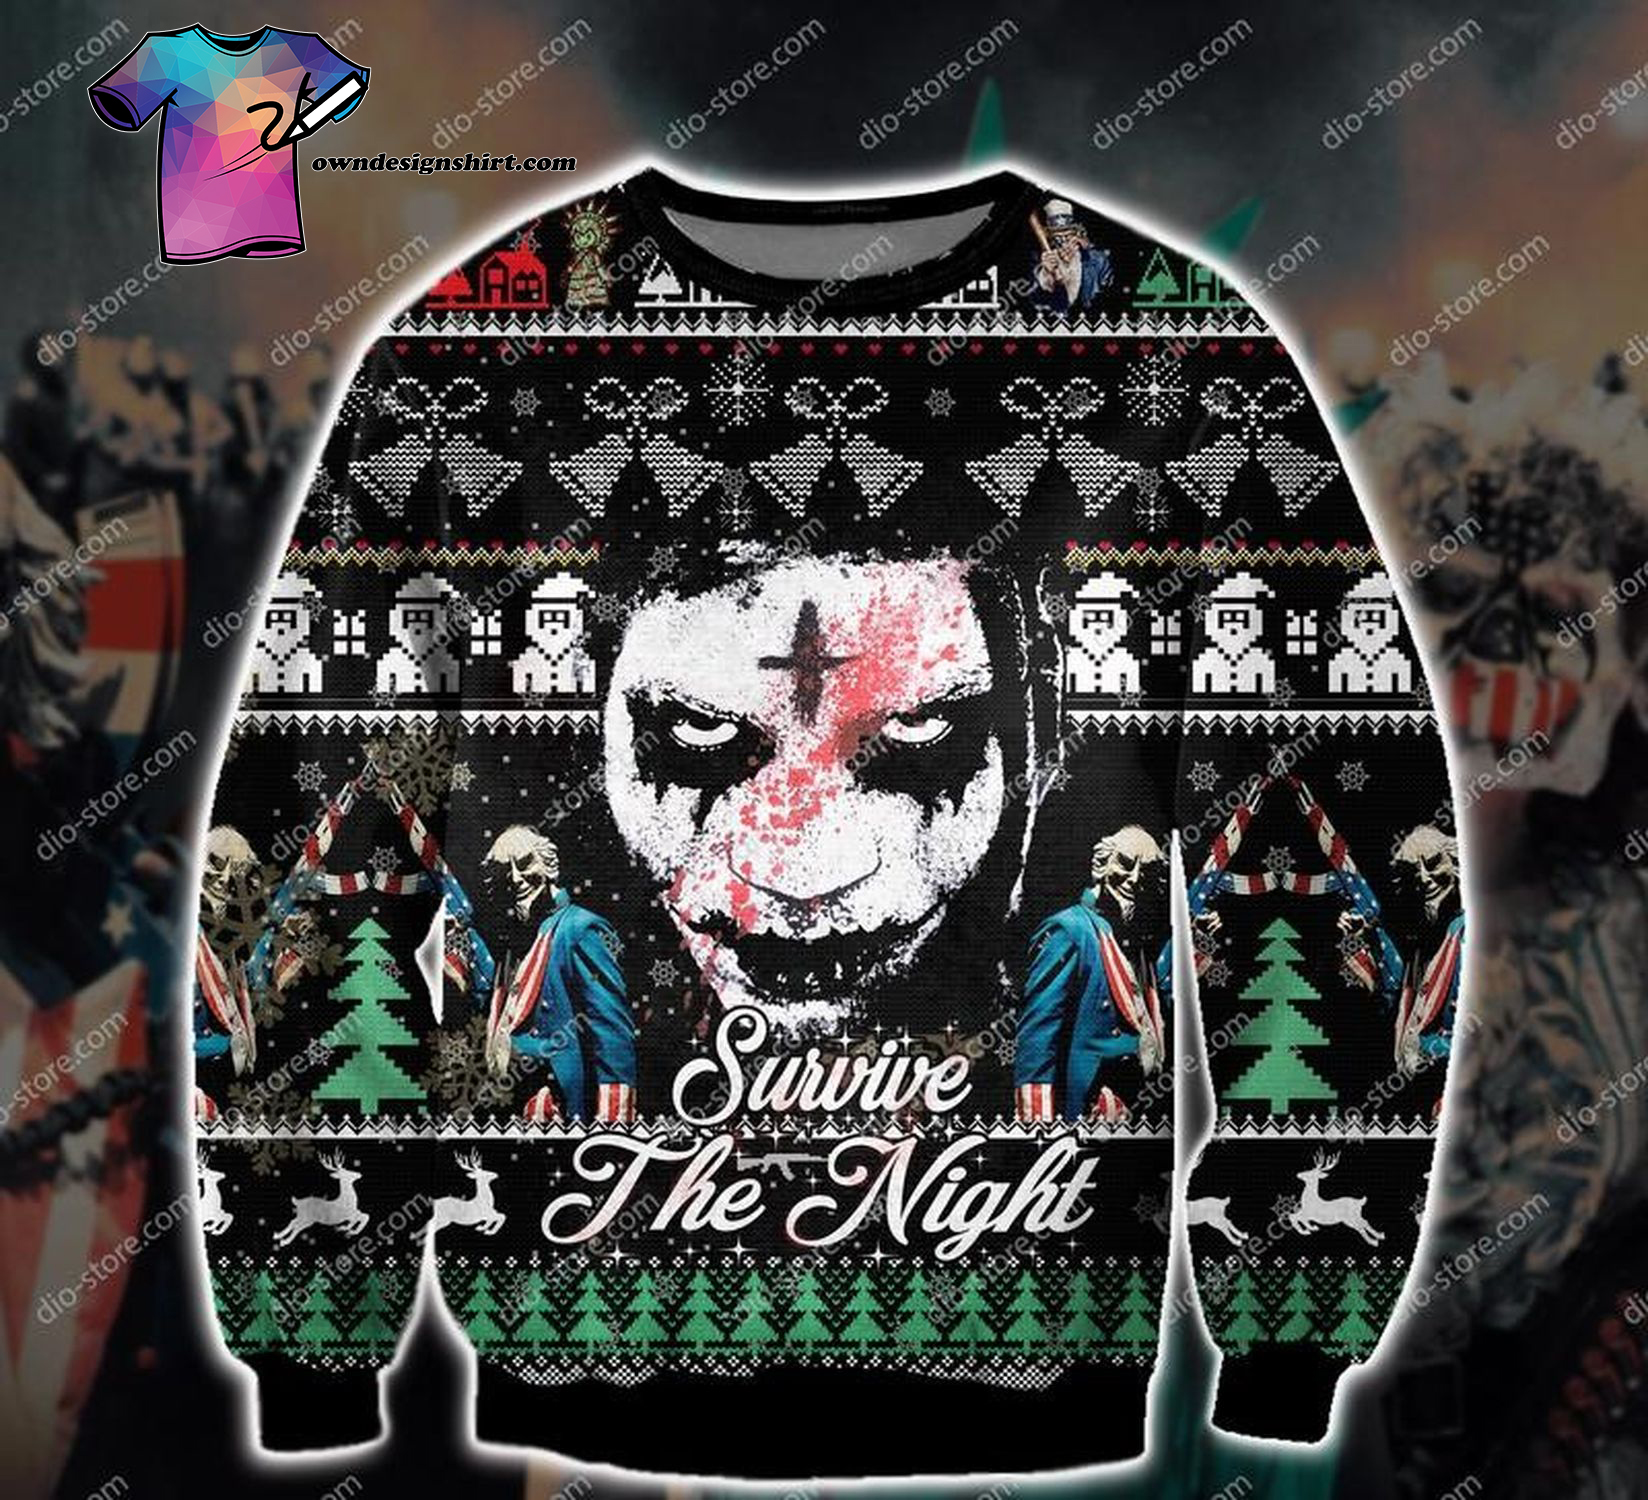 The Purge Survive the Night Ugly Christmas Sweater